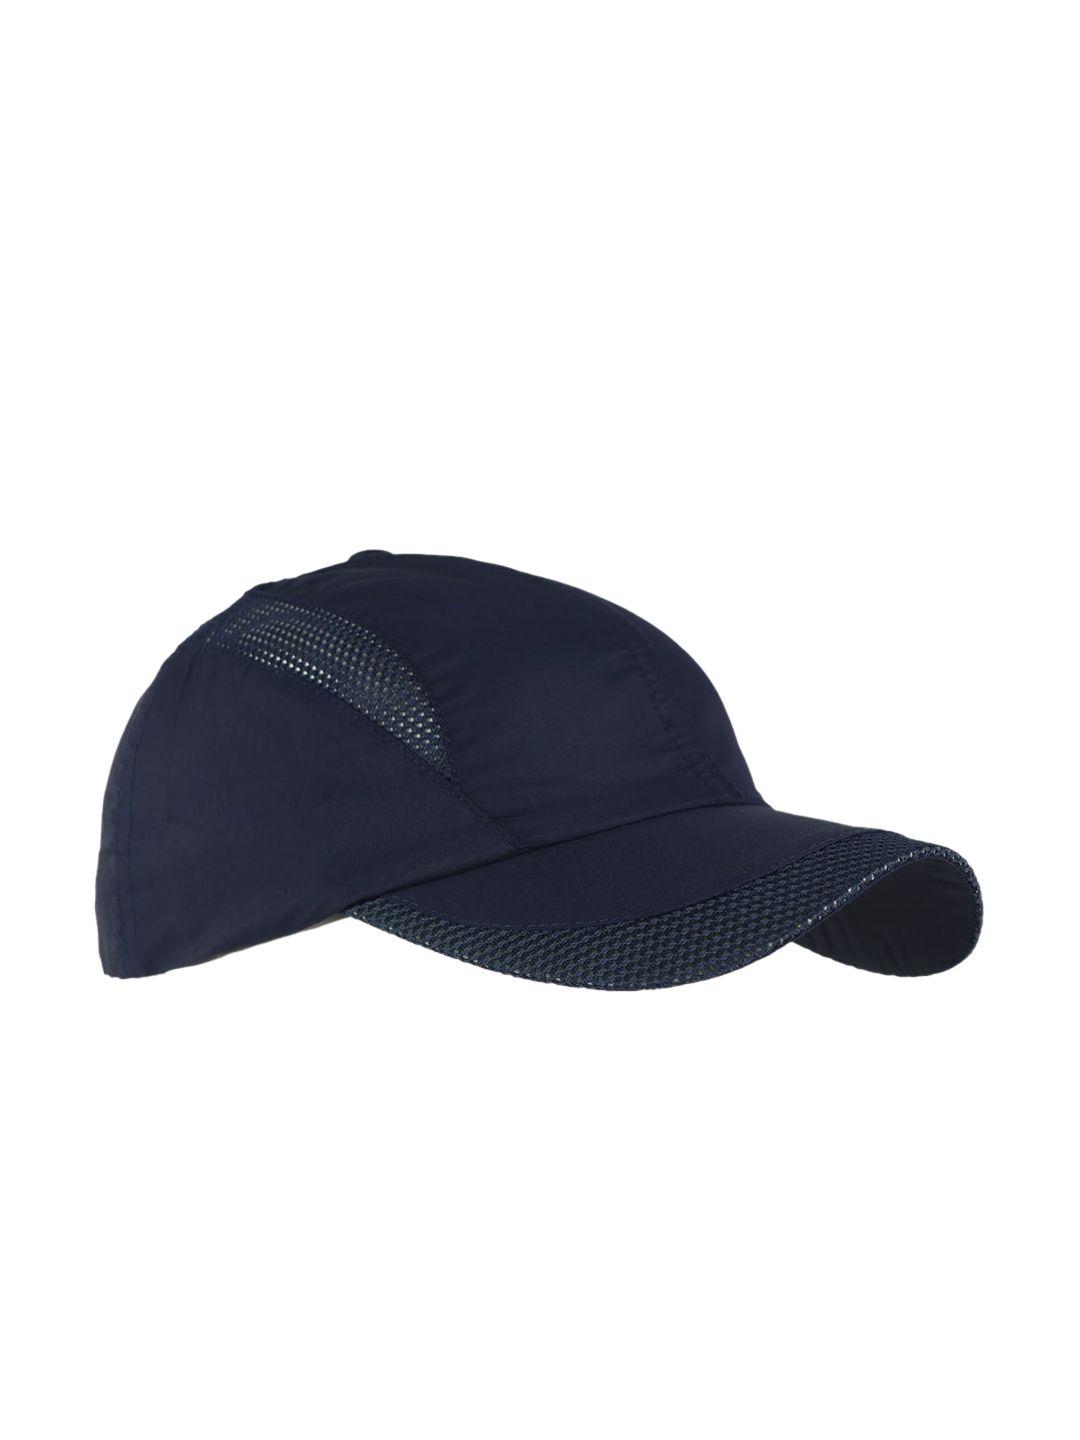 isweven unisex blue solid snapback cap